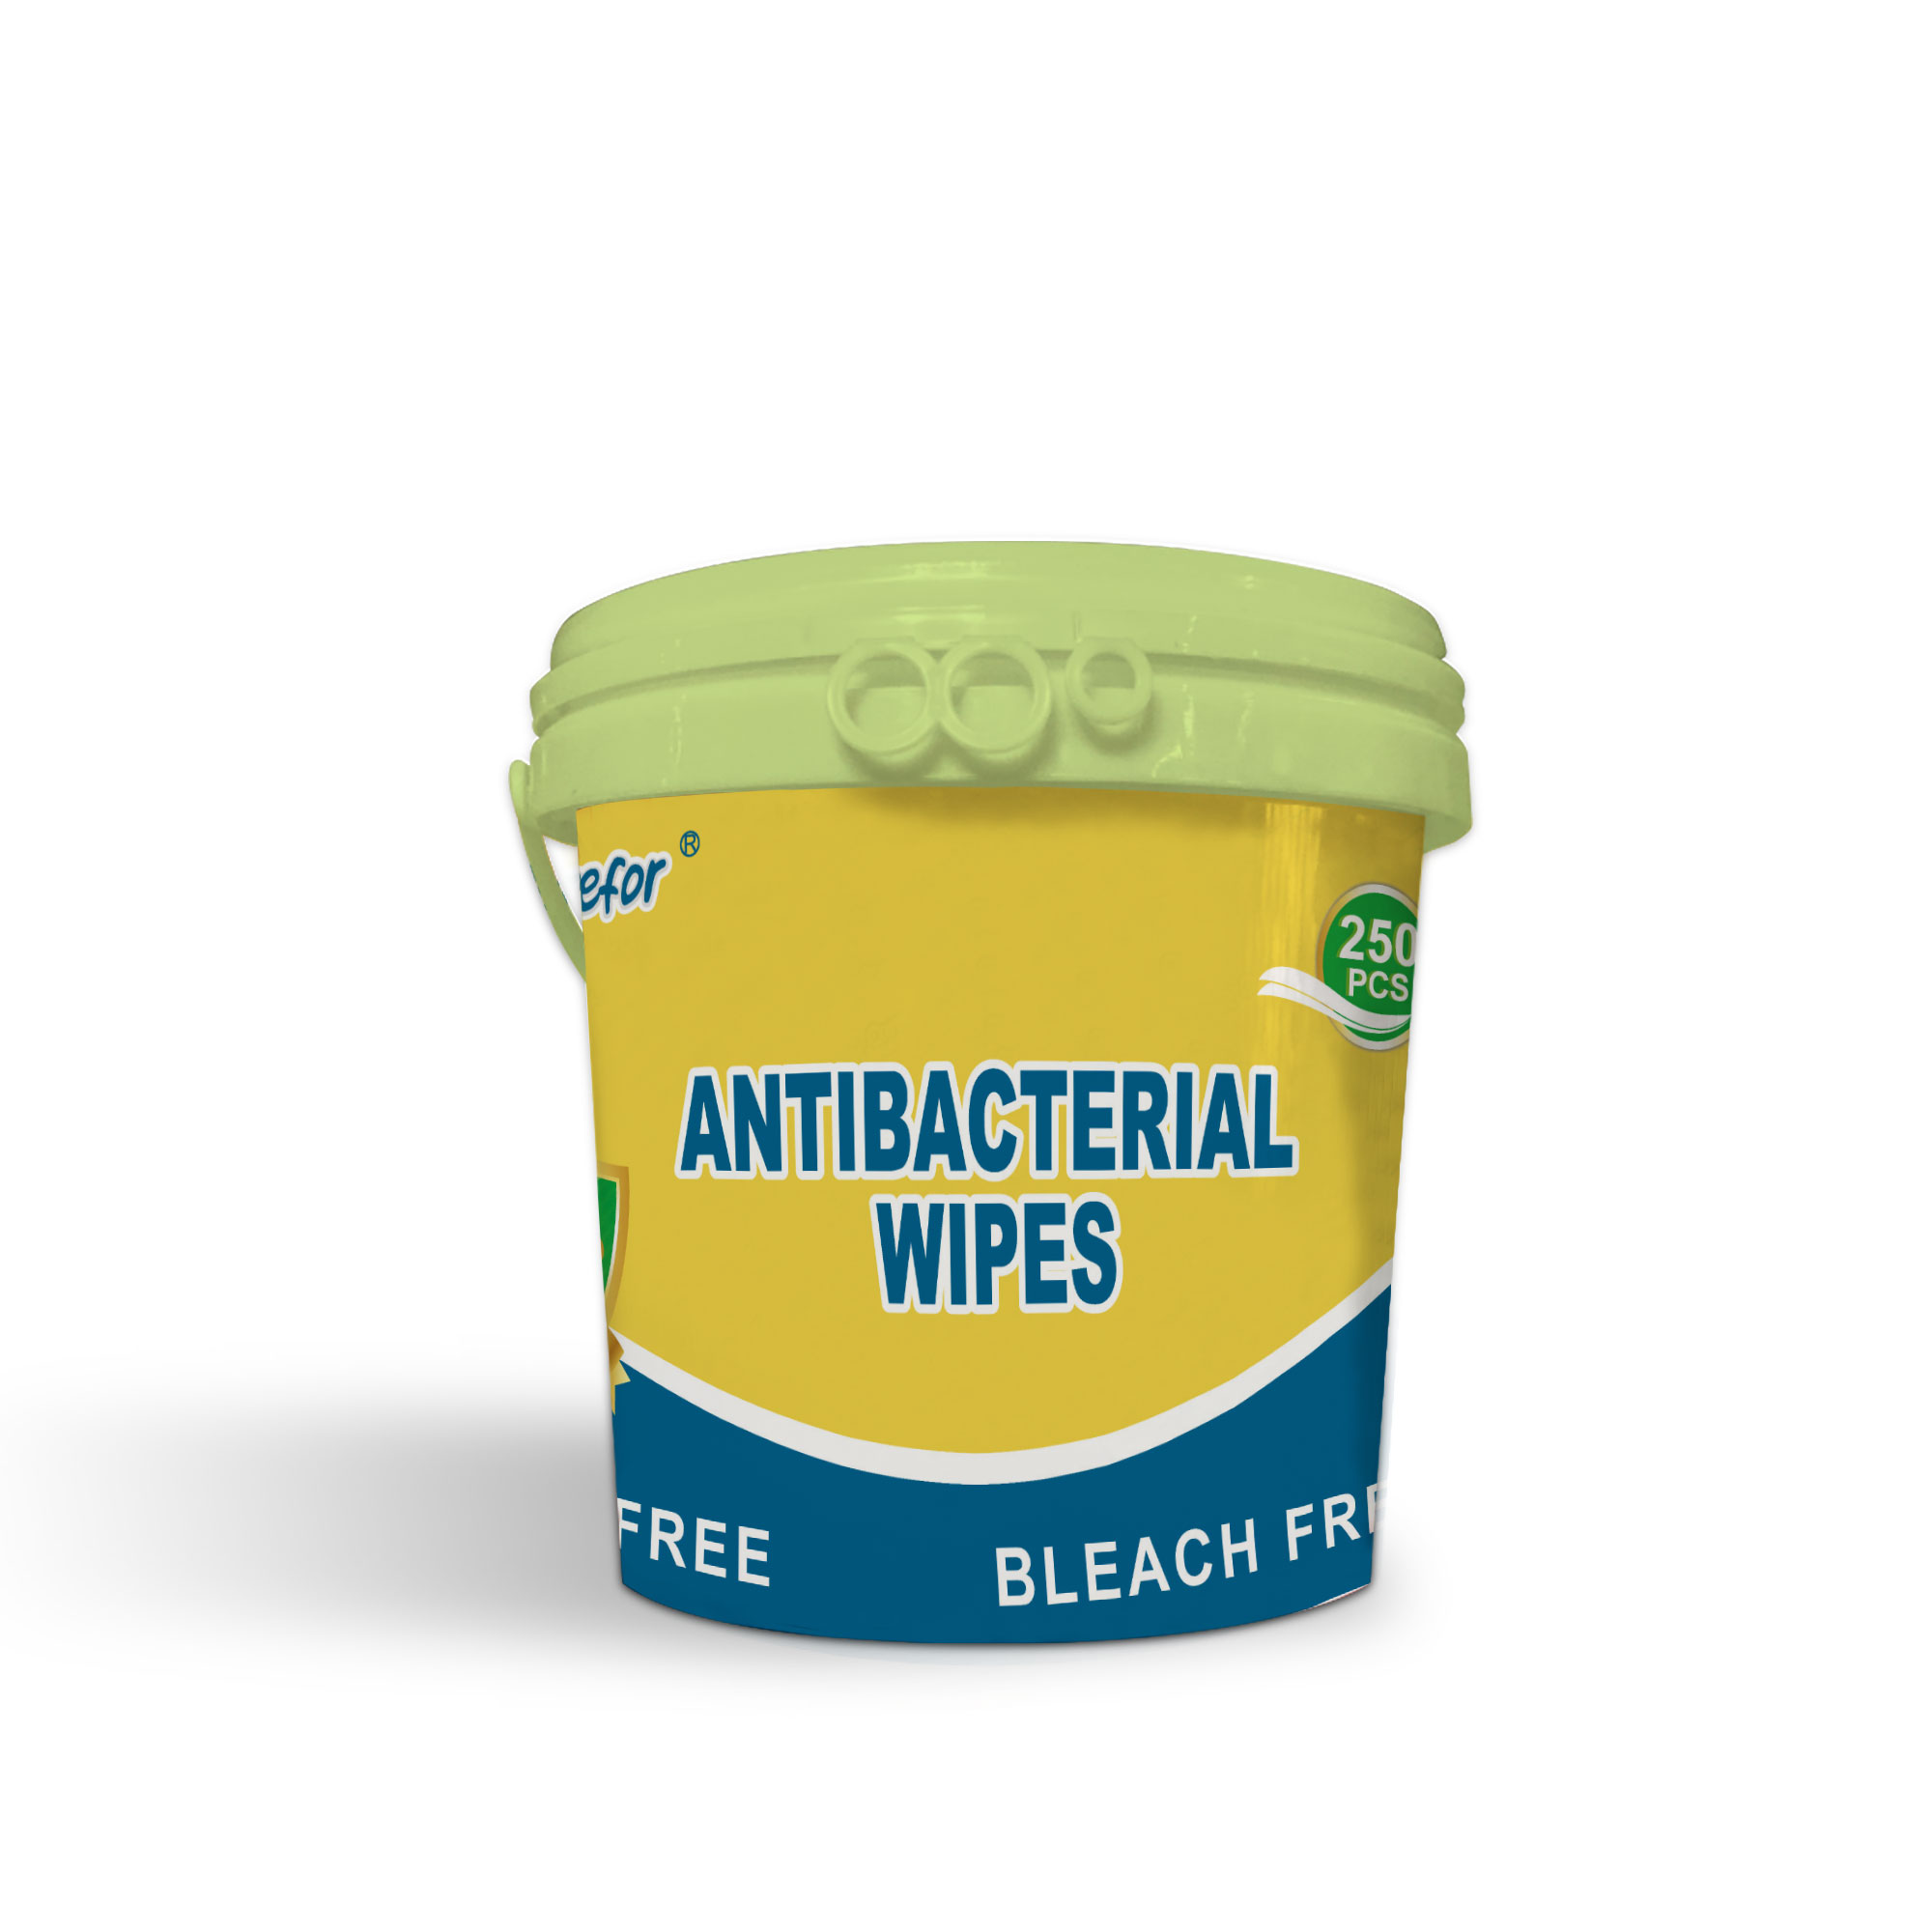 Alcohol and bleach free wet wipes in bucket